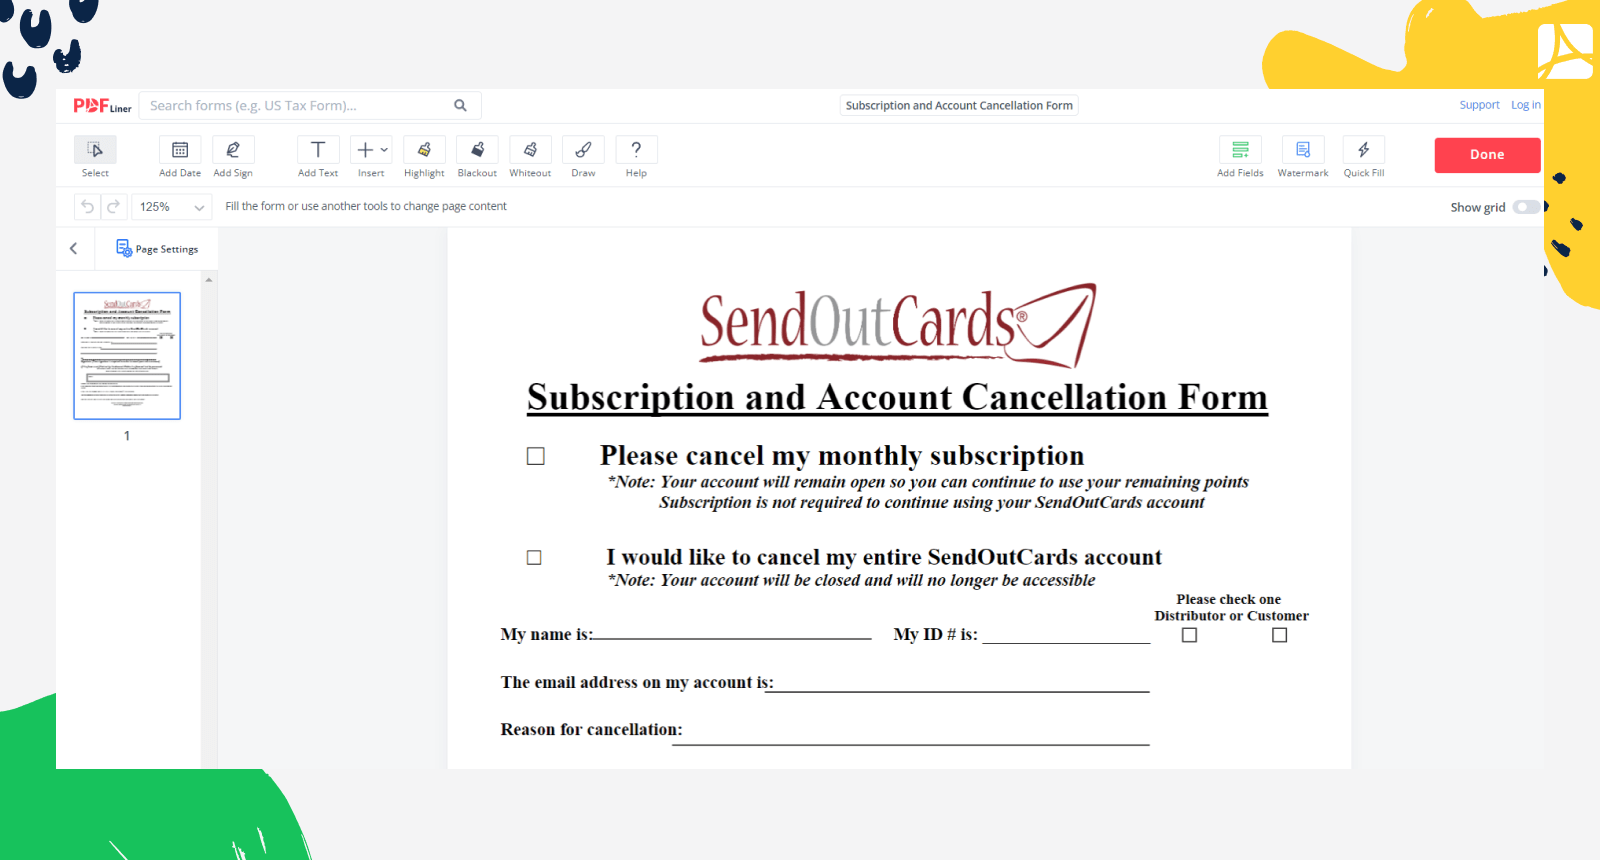 Subscription and Account Cancellation on PDFLiner